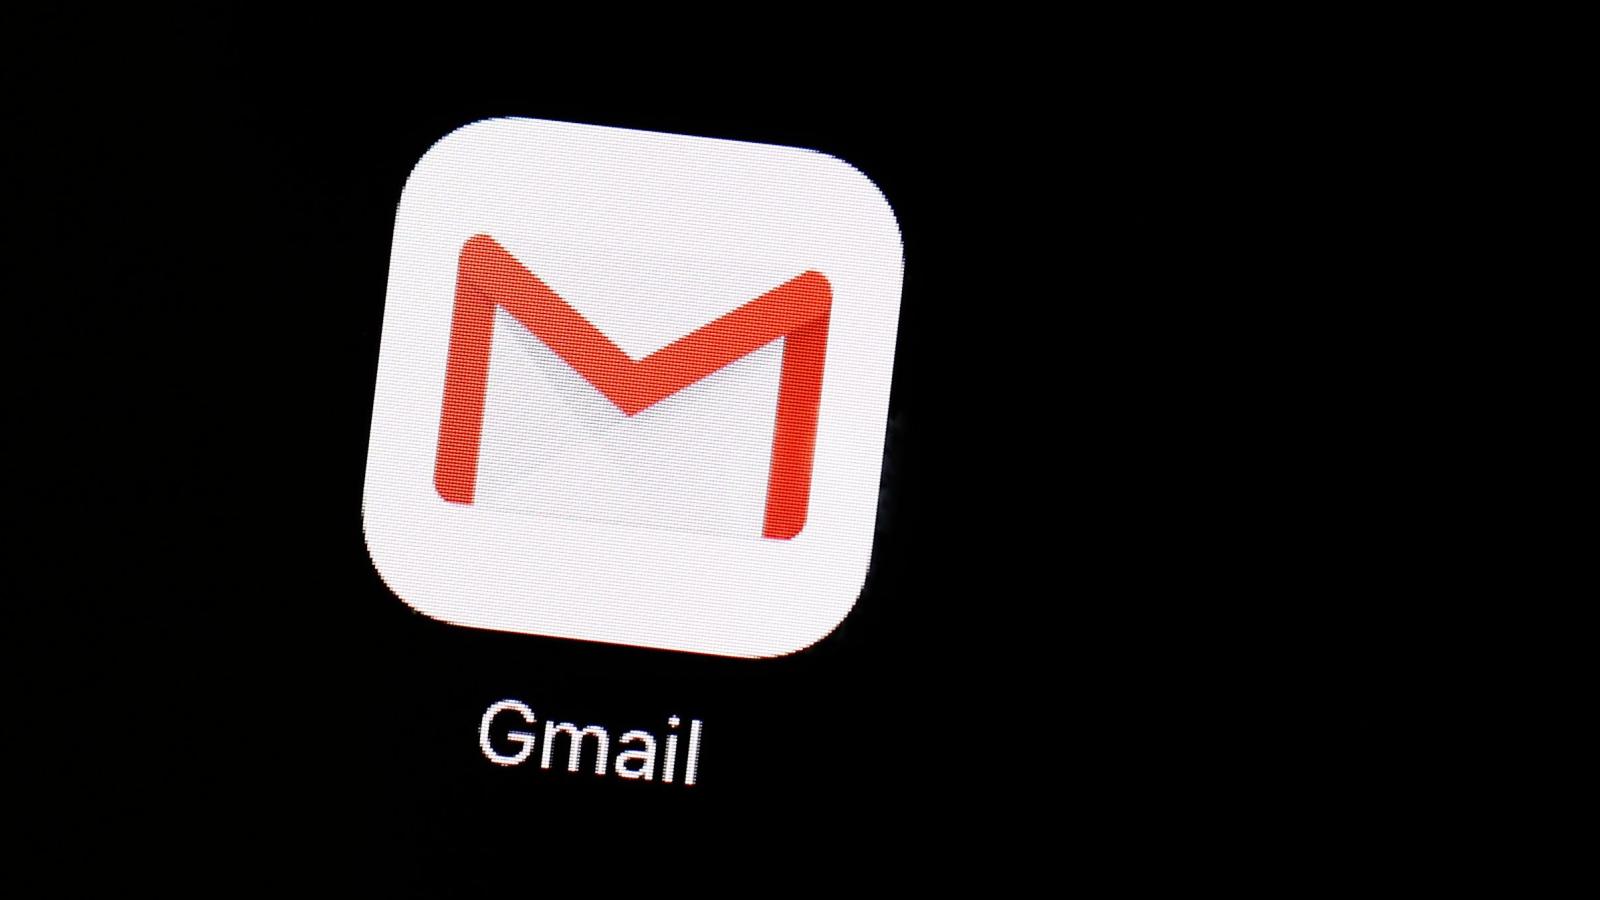 Gmail smart compose: Will it change how we write emails?